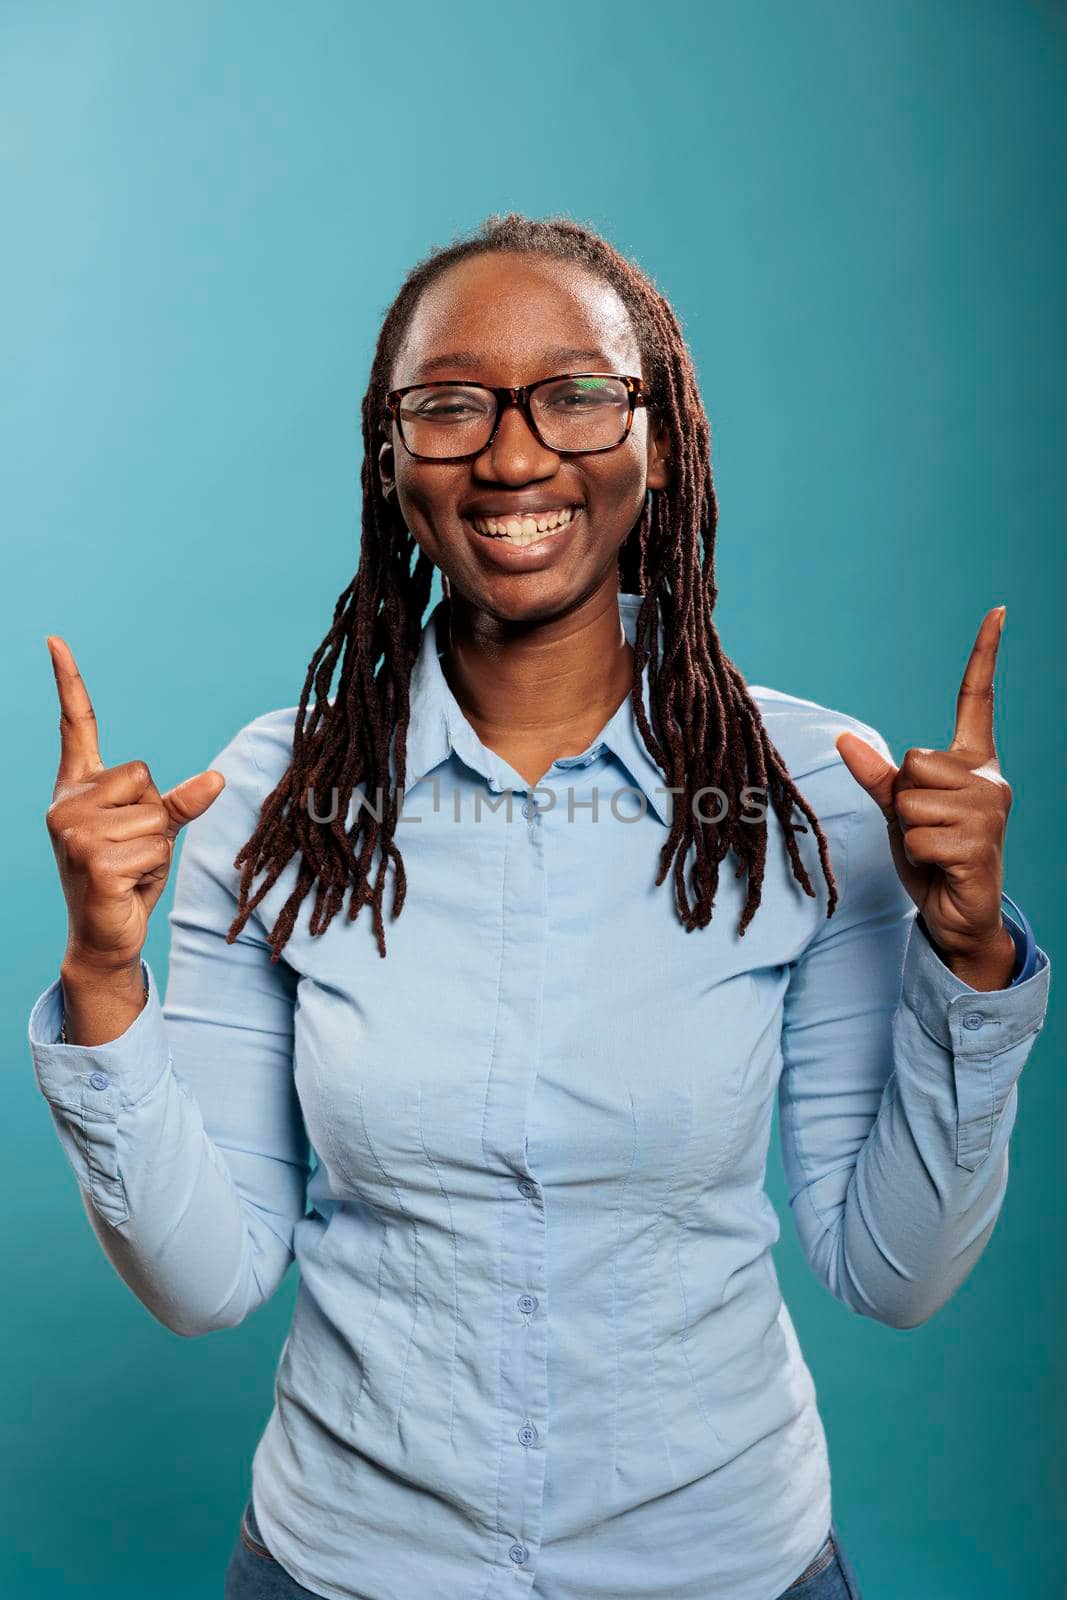 Excited happy beautiful woman smiling heartily while pointing fingers up on blue background. Confident and positive young adult person pointing hands up while looking at camera.